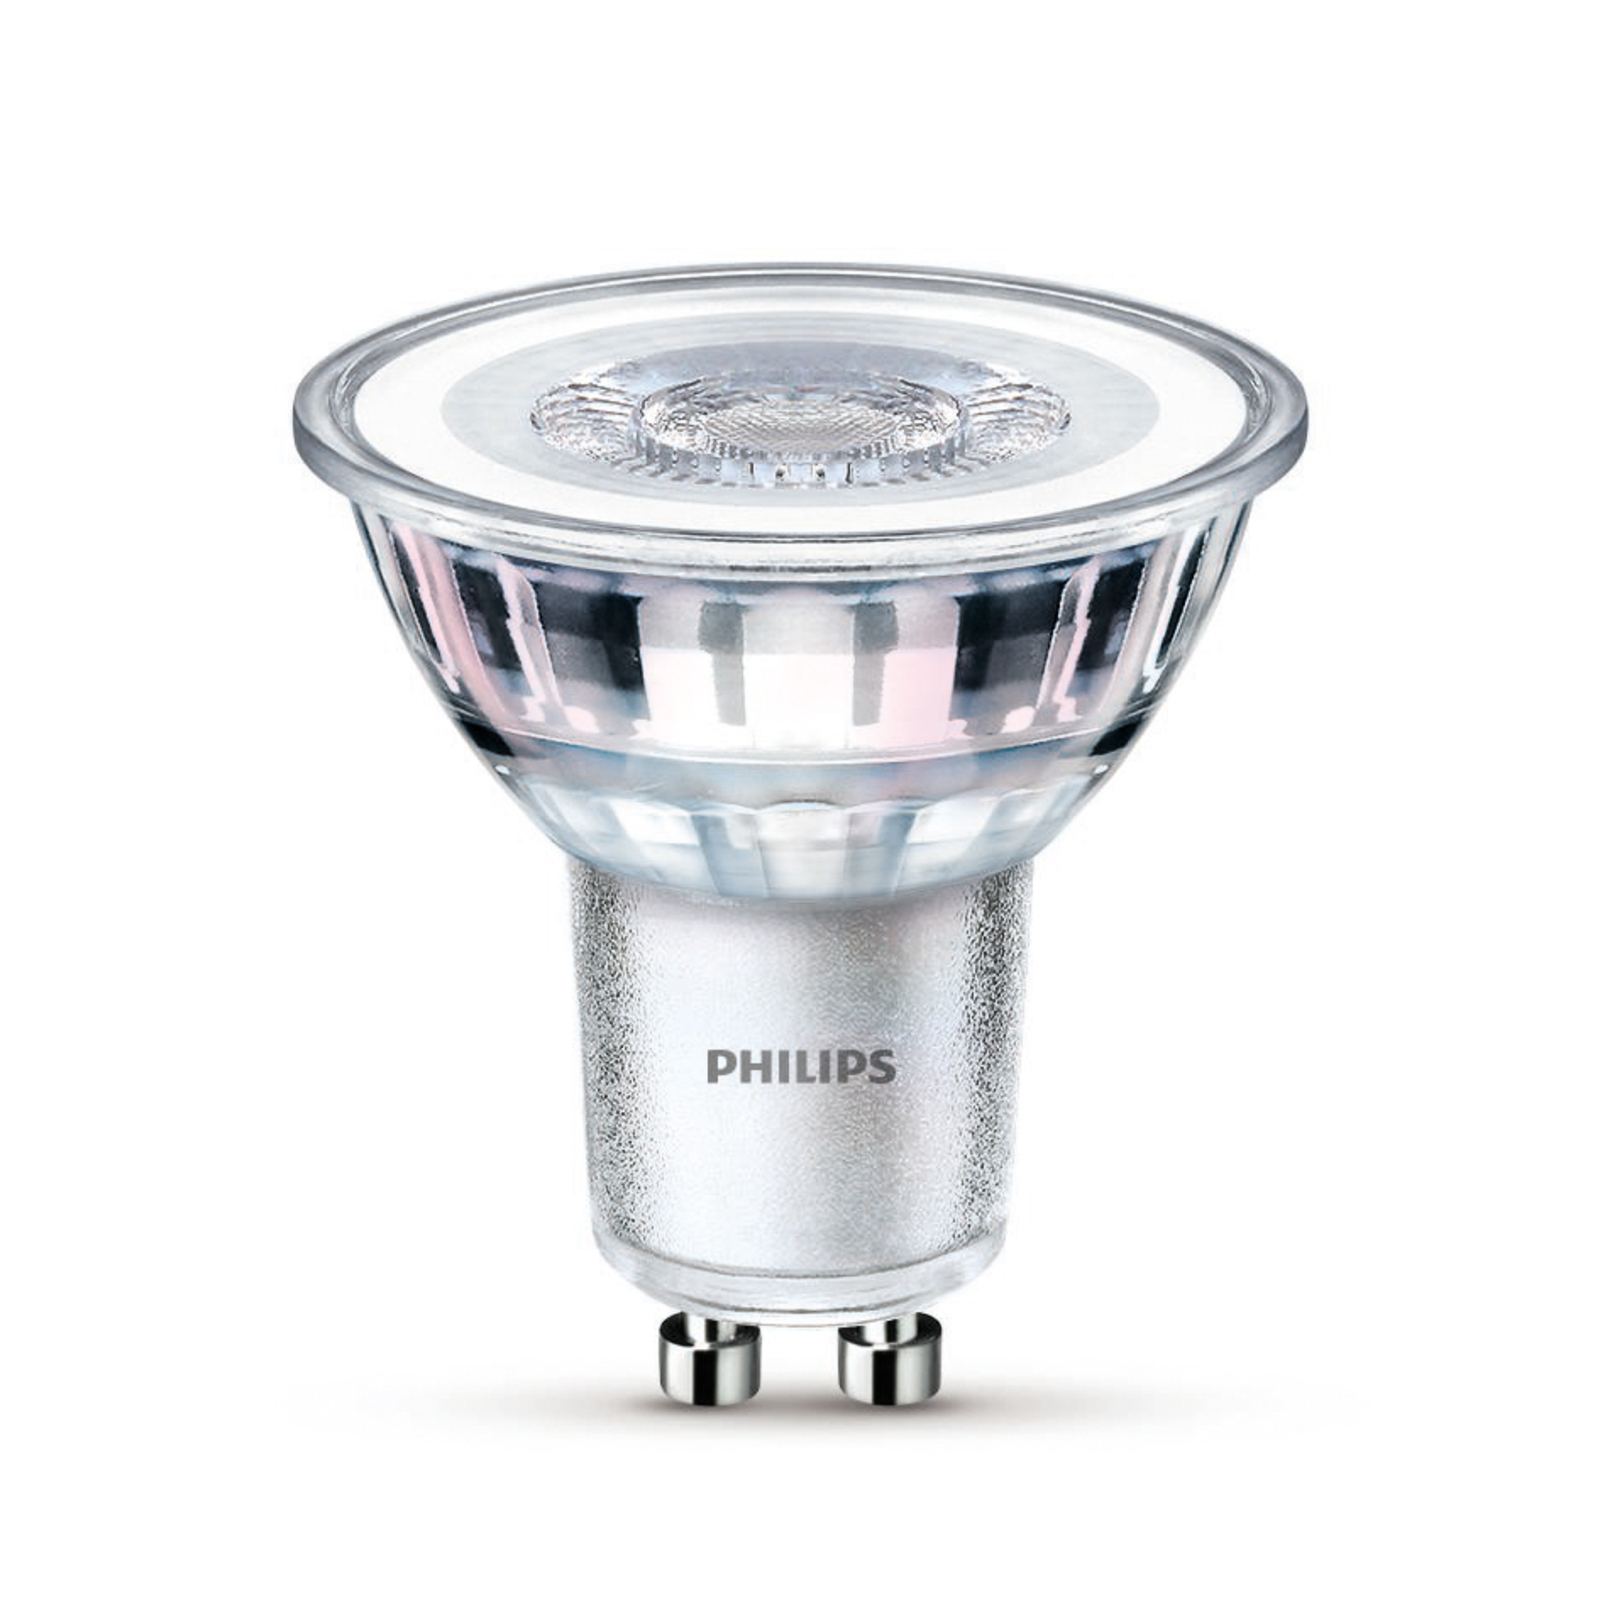 Philips LED GU10 4,6 W 355lm 827 claire 36° x6